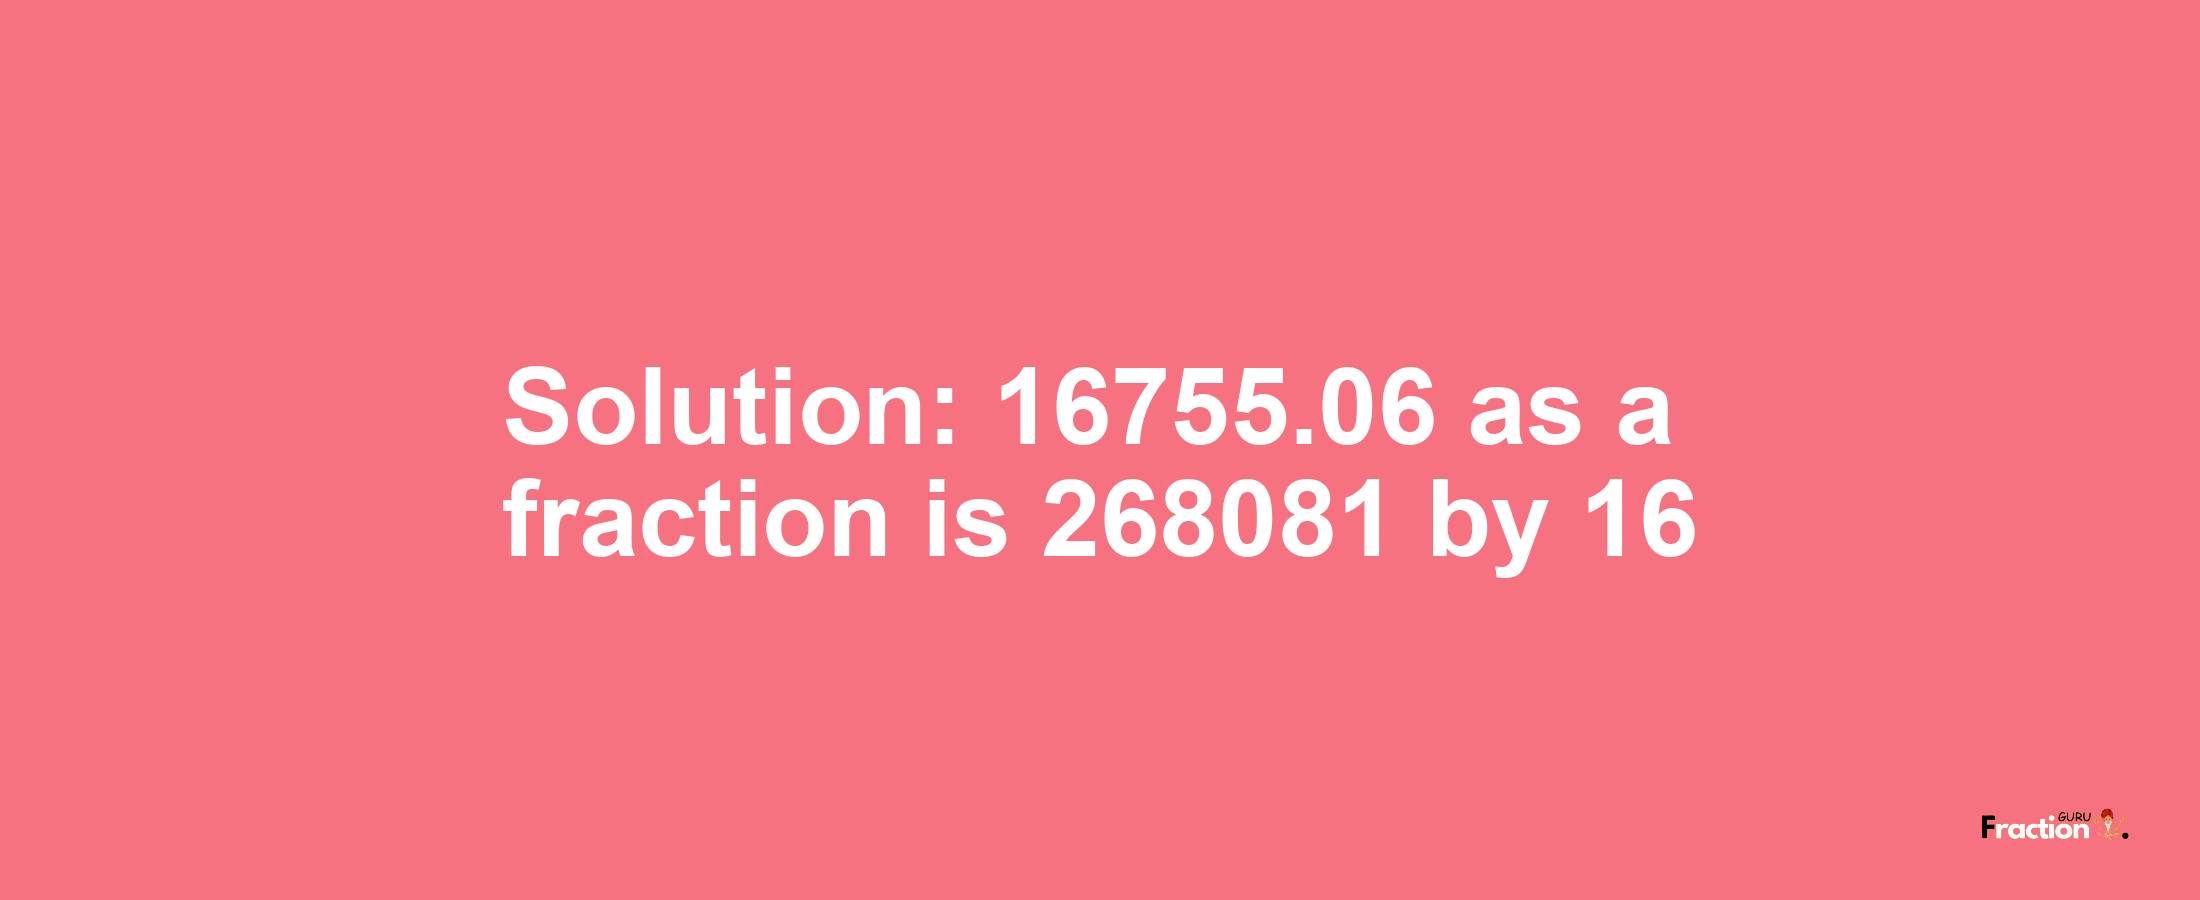 Solution:16755.06 as a fraction is 268081/16